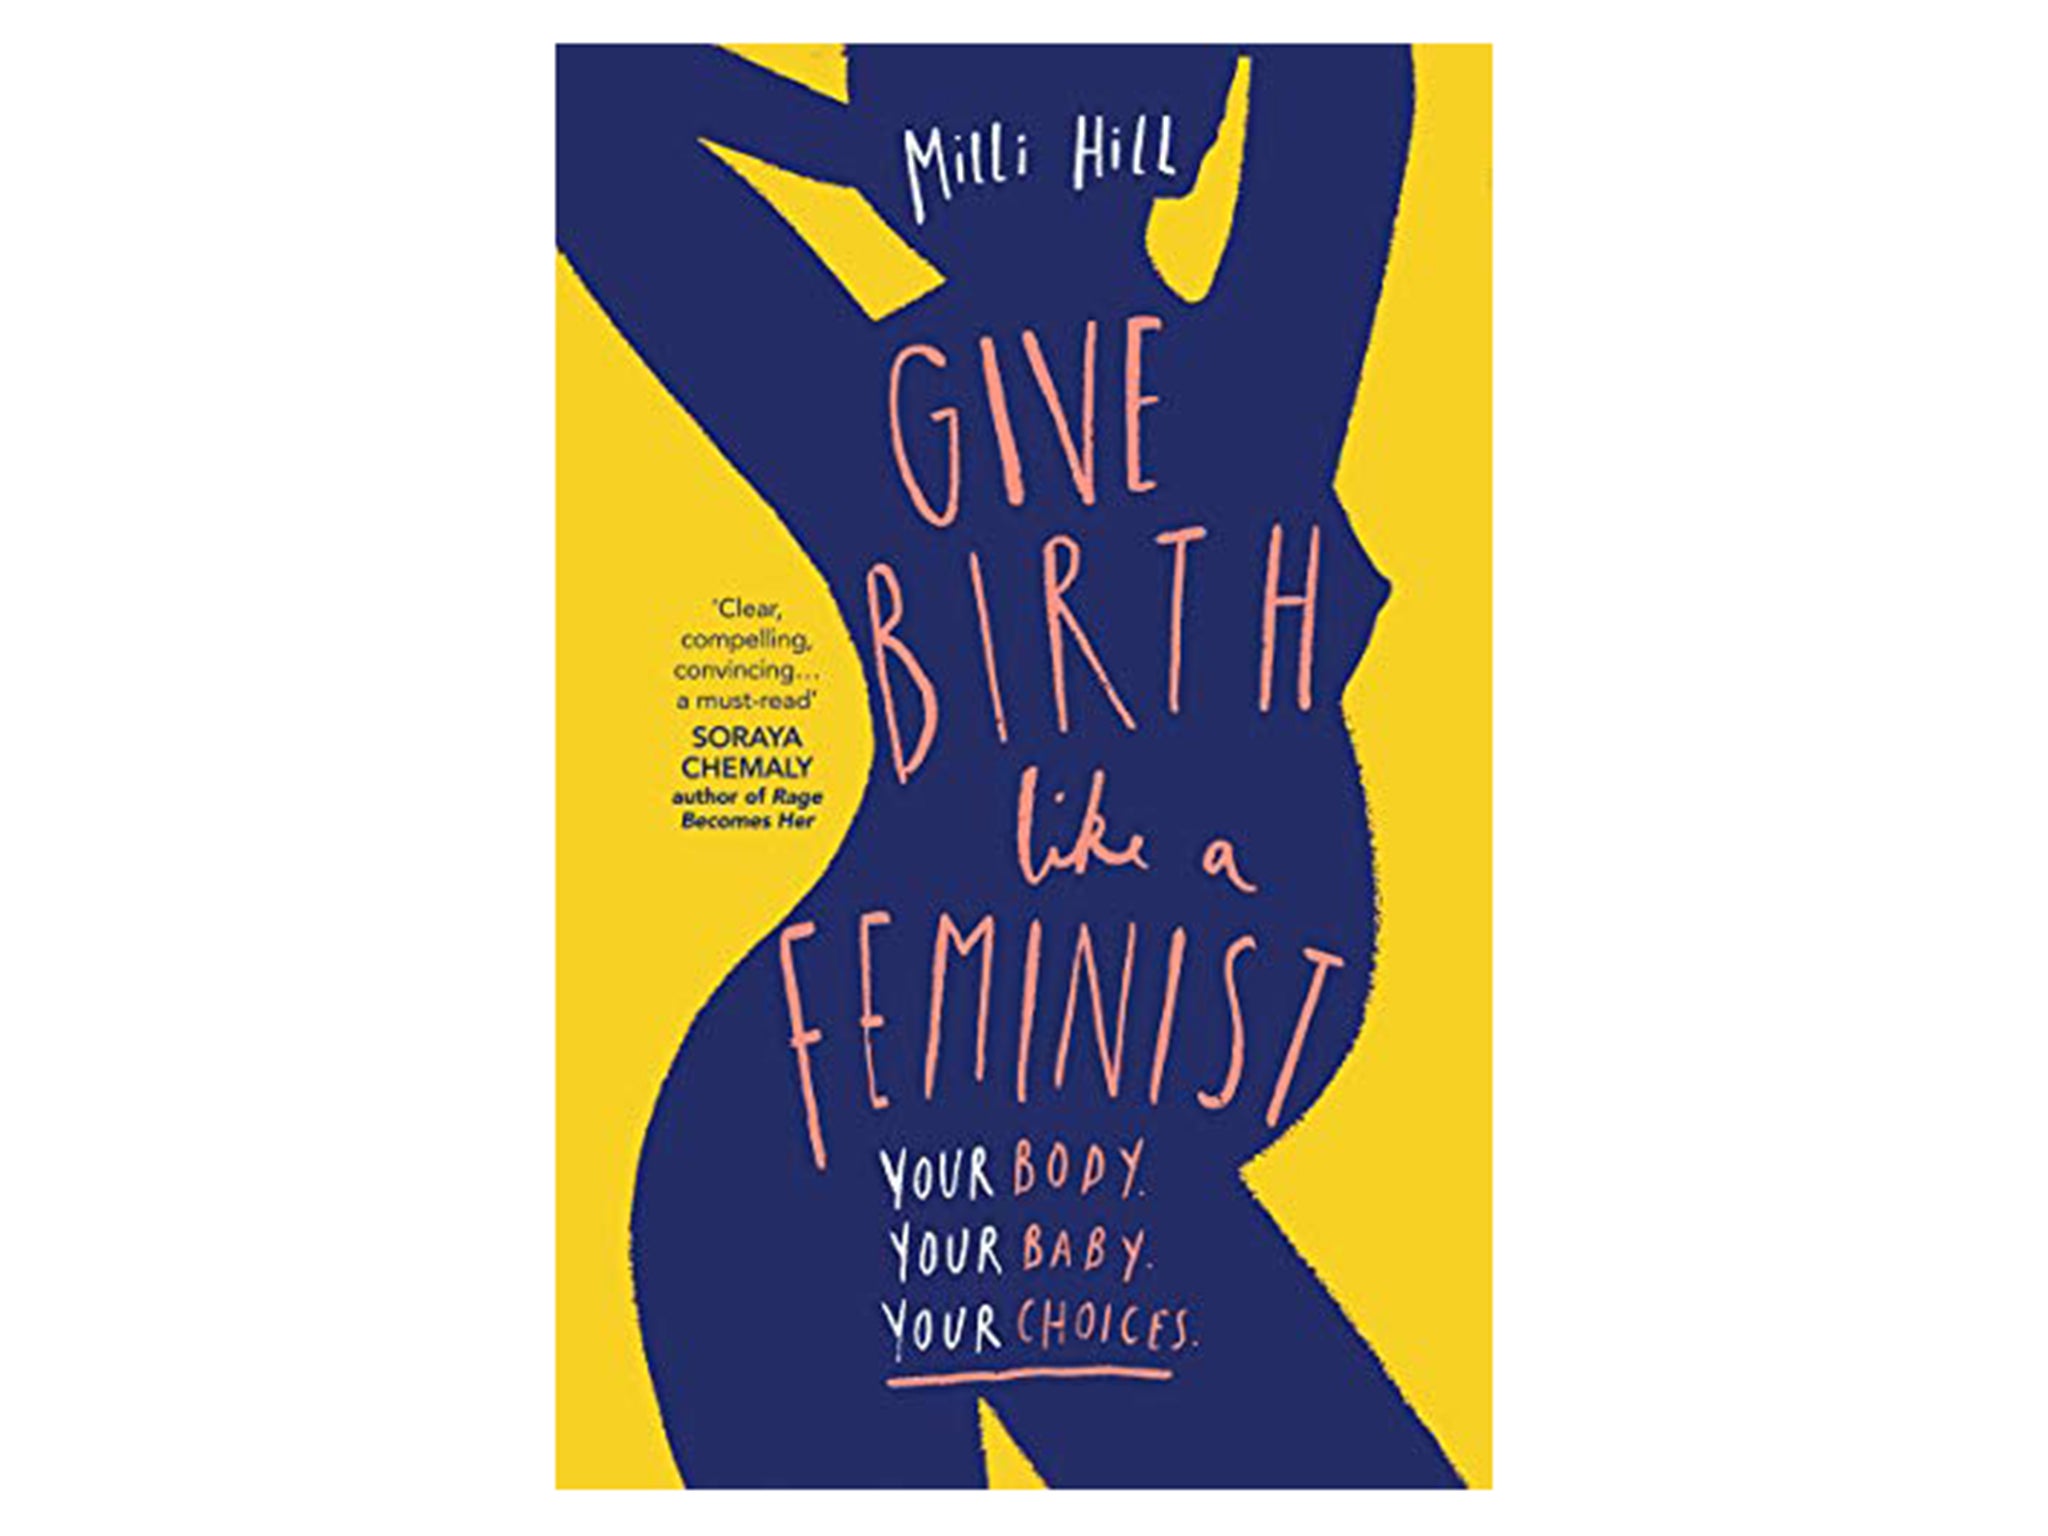 Give Birth Like a Feminist Your body. Your baby. Your choices by Milli Hill. Published by HQ £8.99, Amazon.jpg